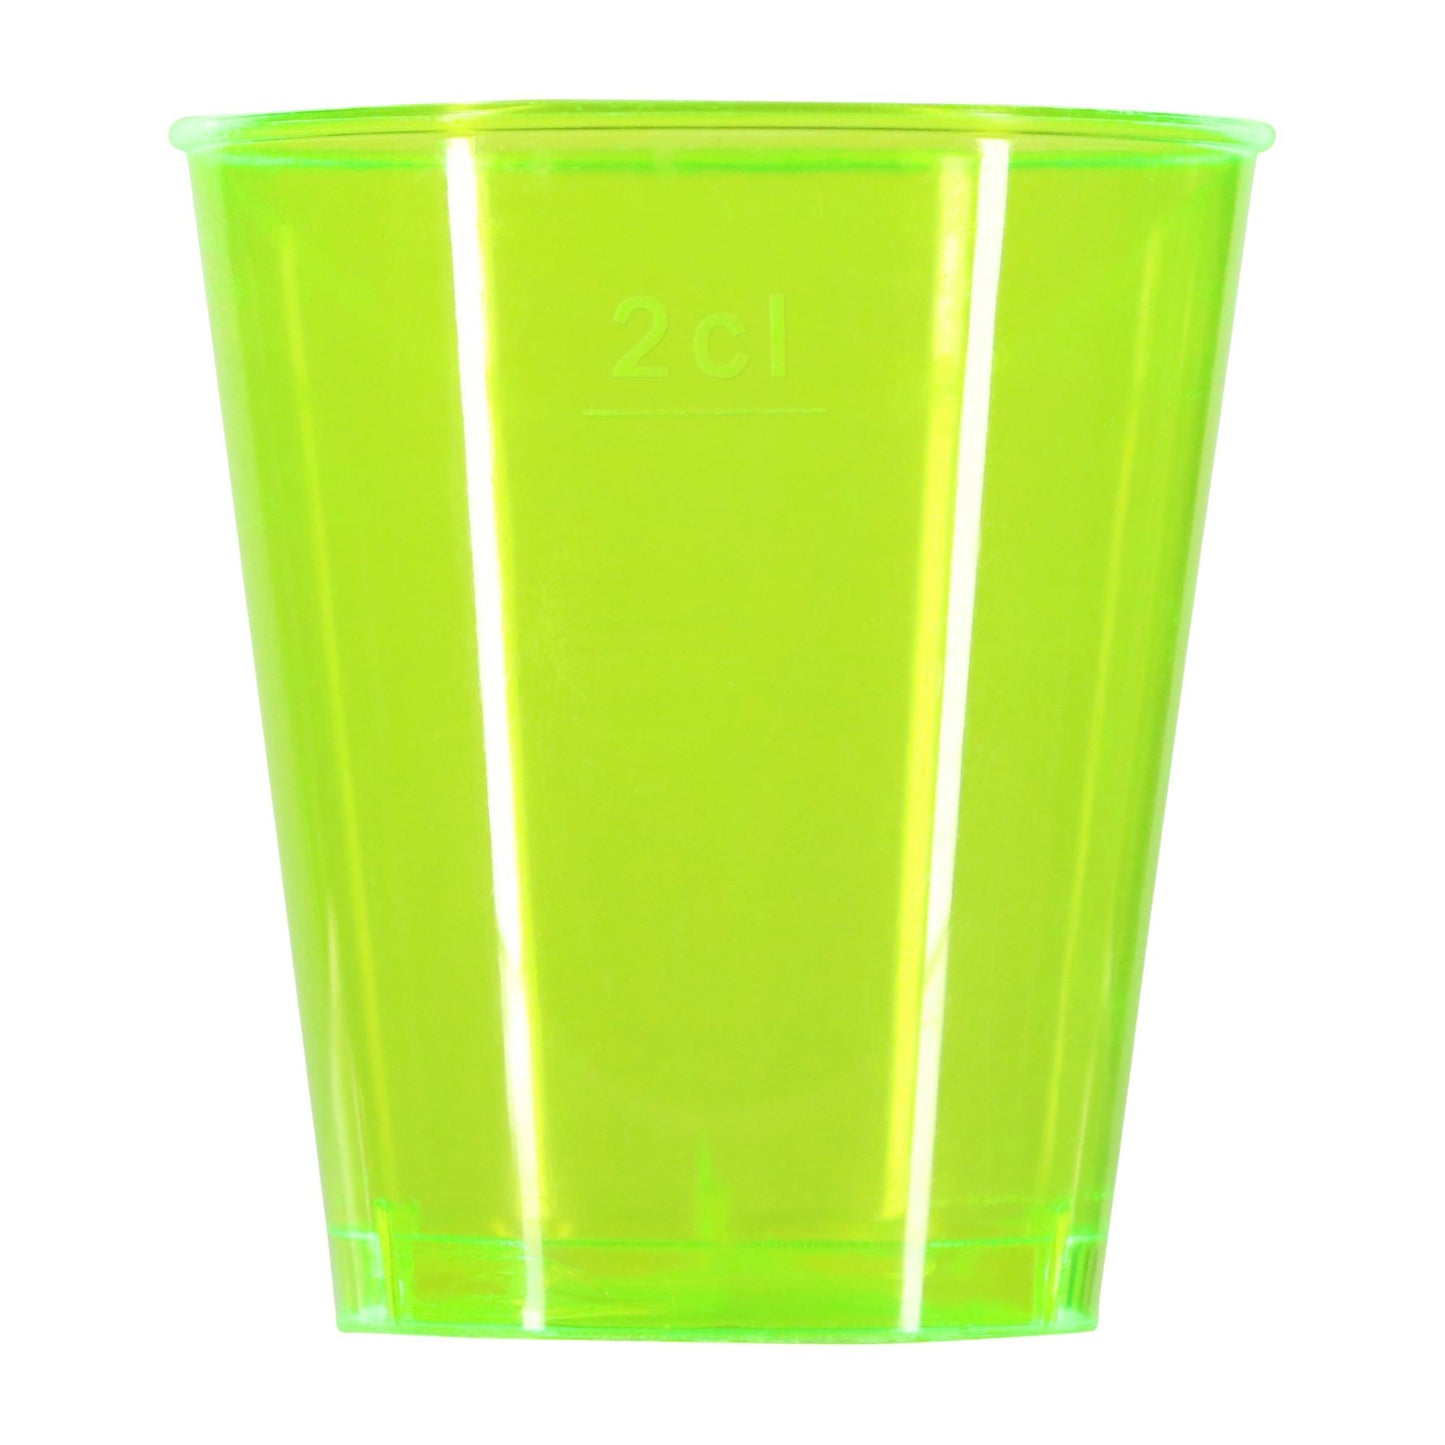 1296 x Neon Shot Glasses Plastic Marked 3cl 30ml Bright Colour Jelly Disposable-5056020179825-PCUP-3CLDISx36-Product Pro-30ml, Bright Shot Glasses, Disposable Shot Glasses, Neon, Neon Shot Glasses, Plastic Shot Glasses, Shots